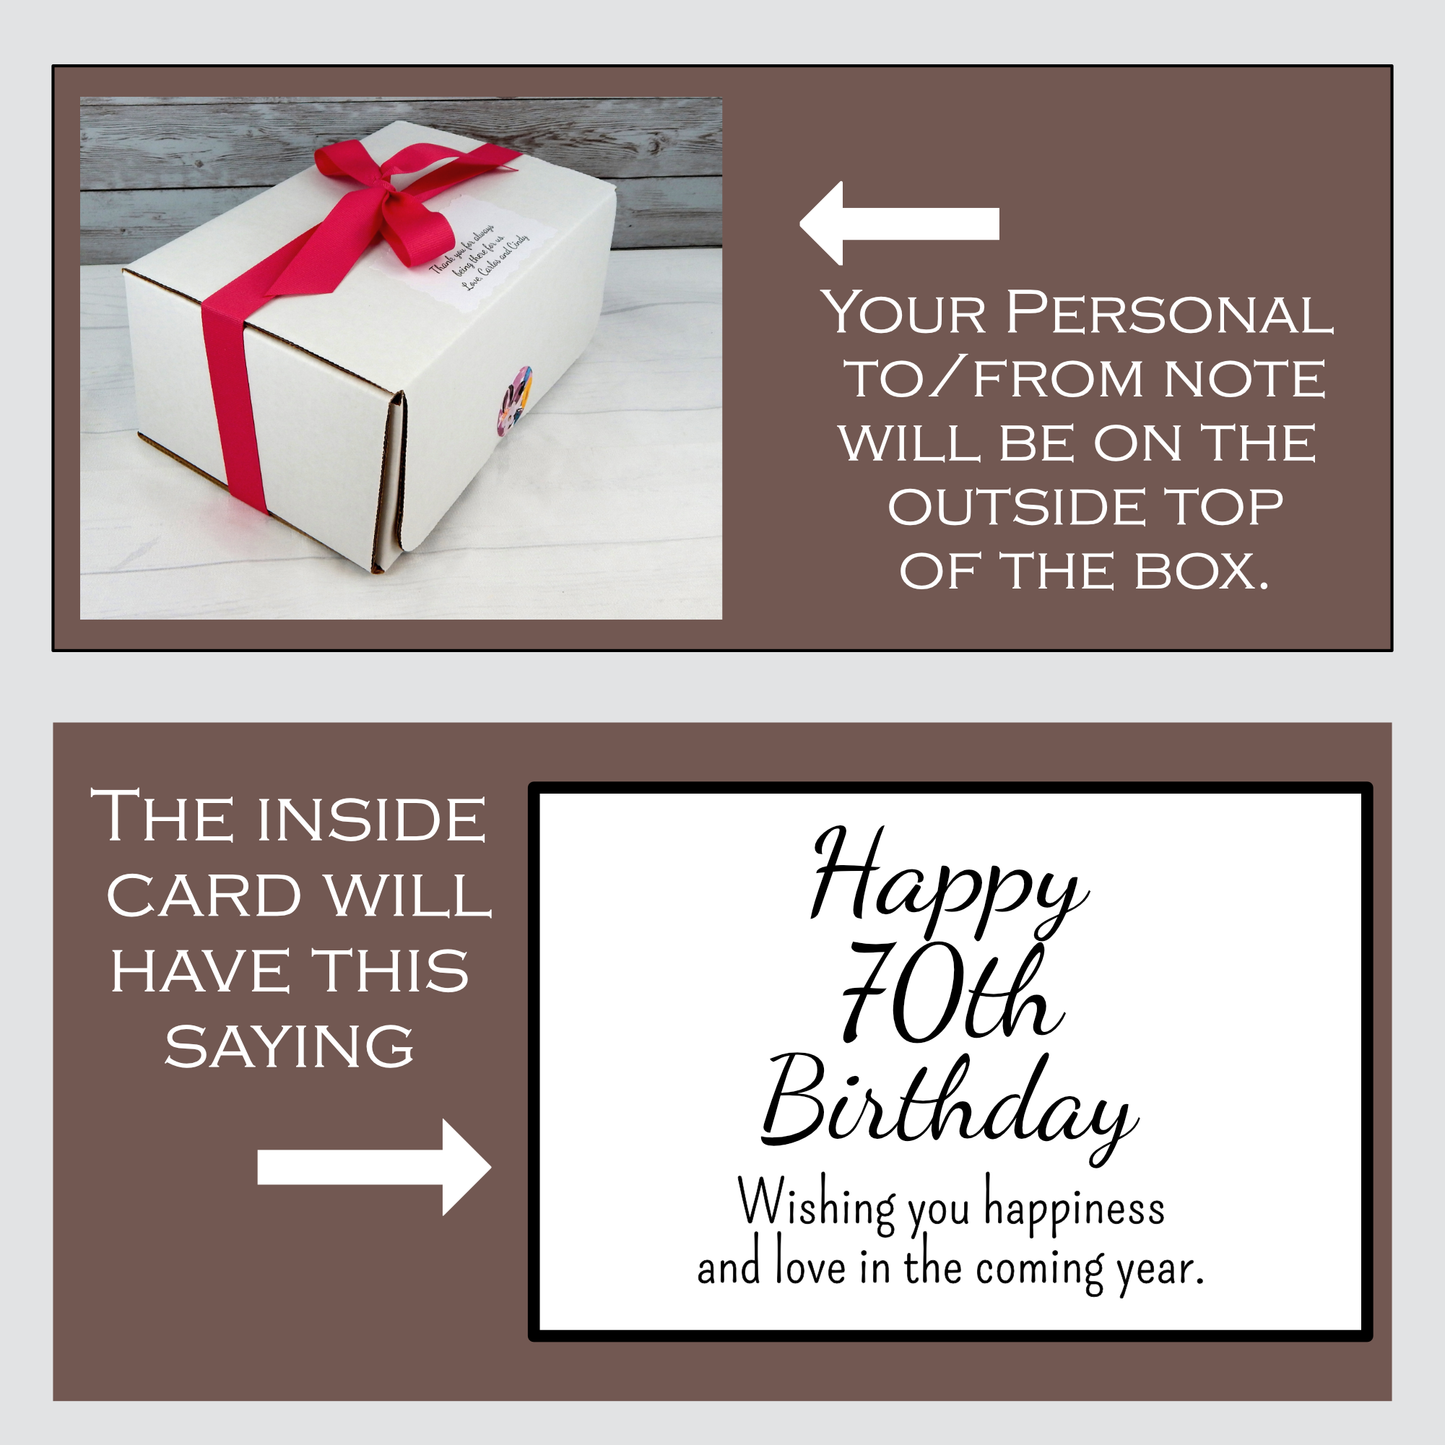 Personalized 70th Birthday Gift Basket